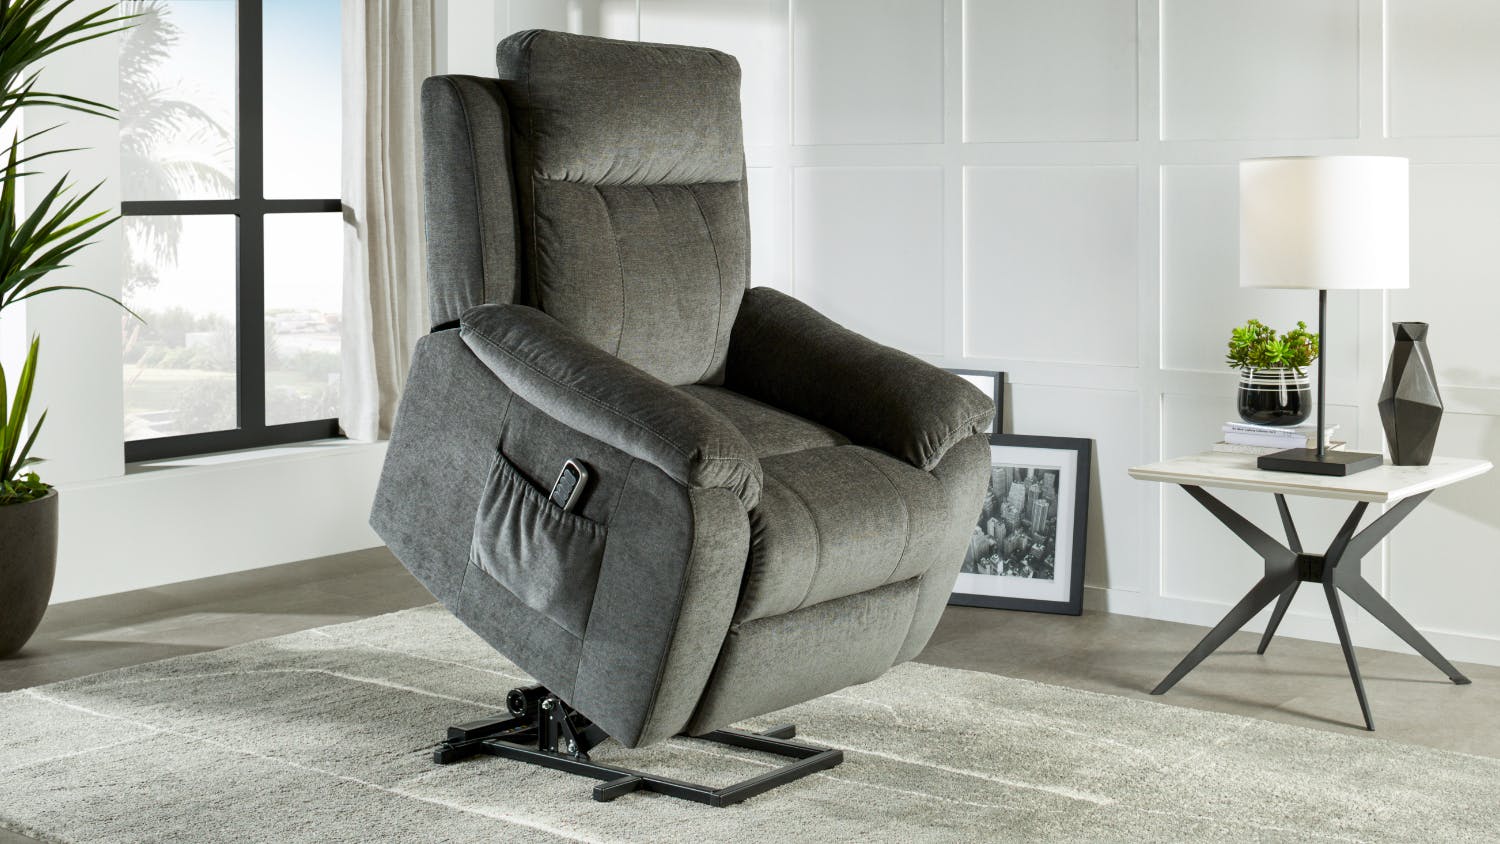 Luximo Fabric Electric Recliner Lift Chair - Licorice